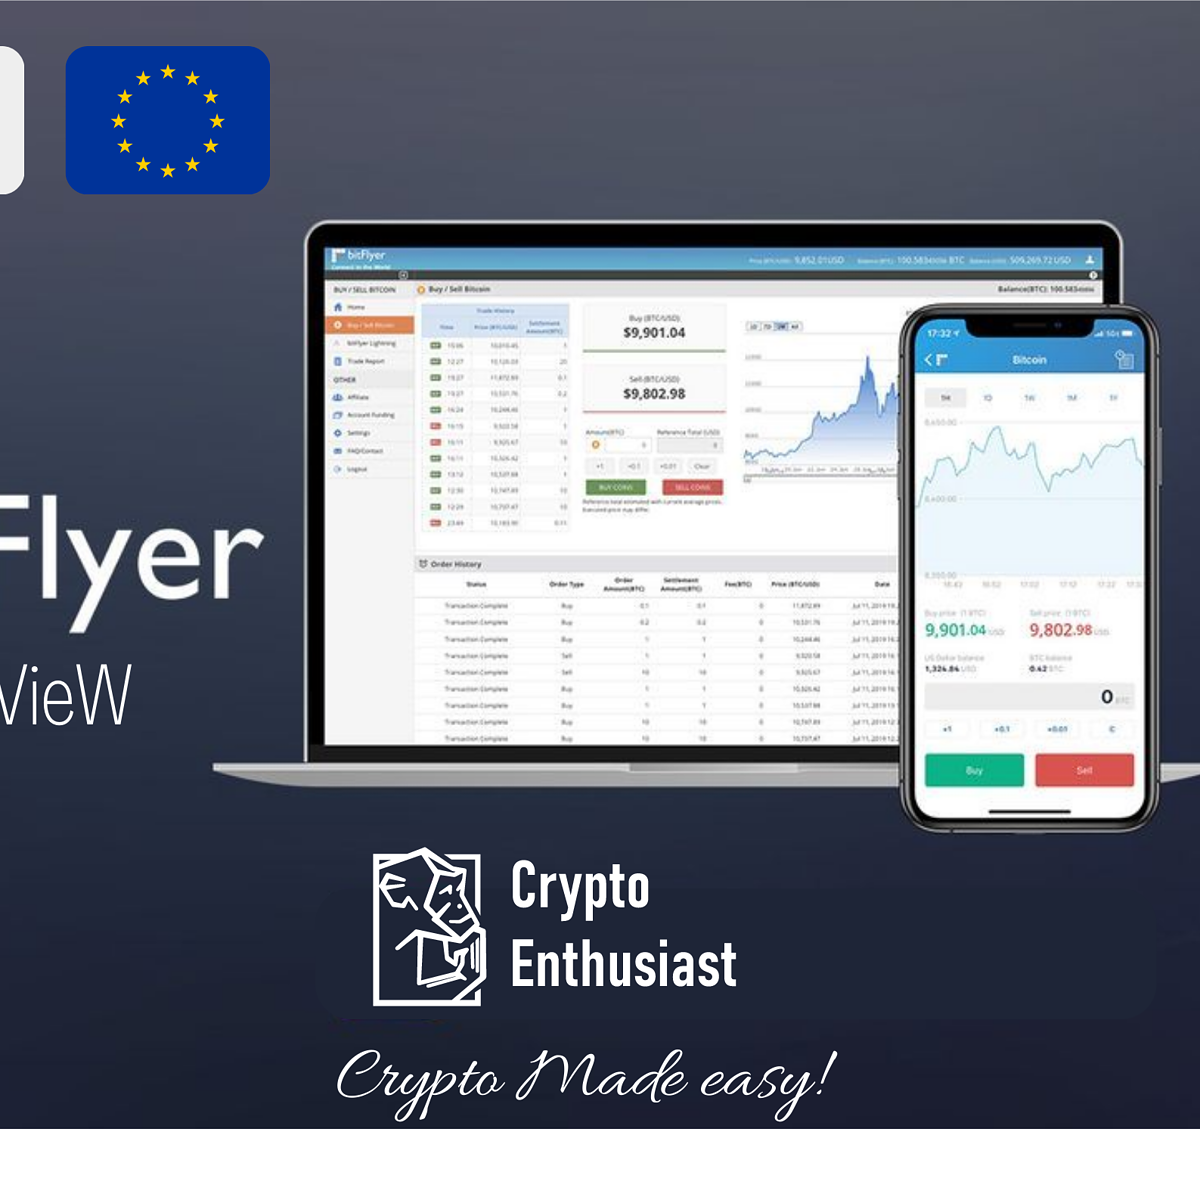 Bitflyer Review | Crypto Enthusiast